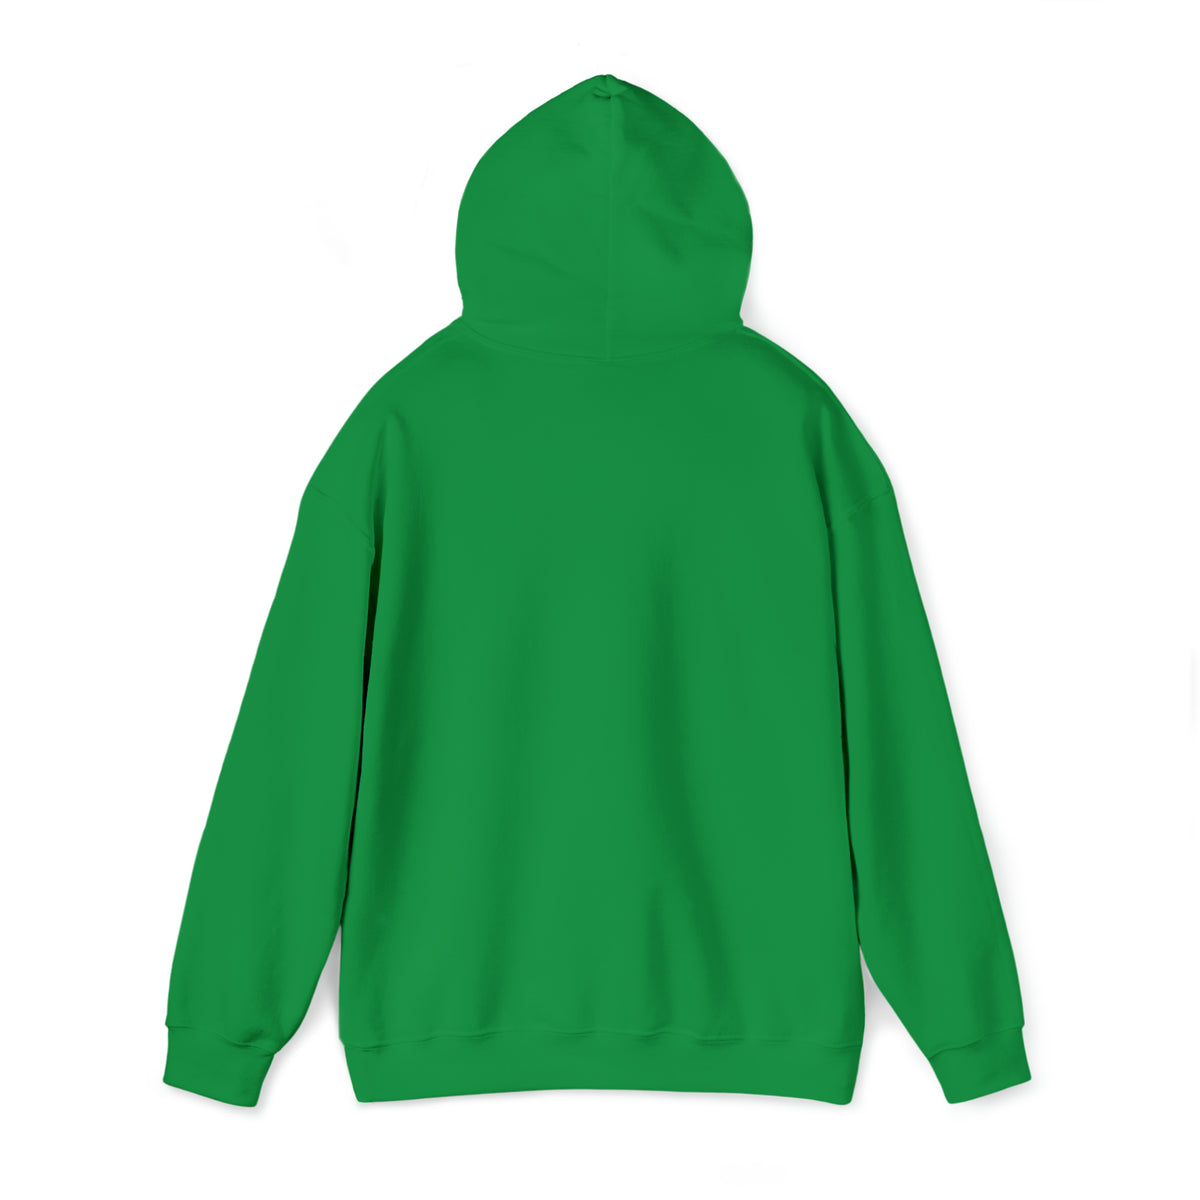 Bit Bliss Art Collection: Colorful Hooded Sweatshirt